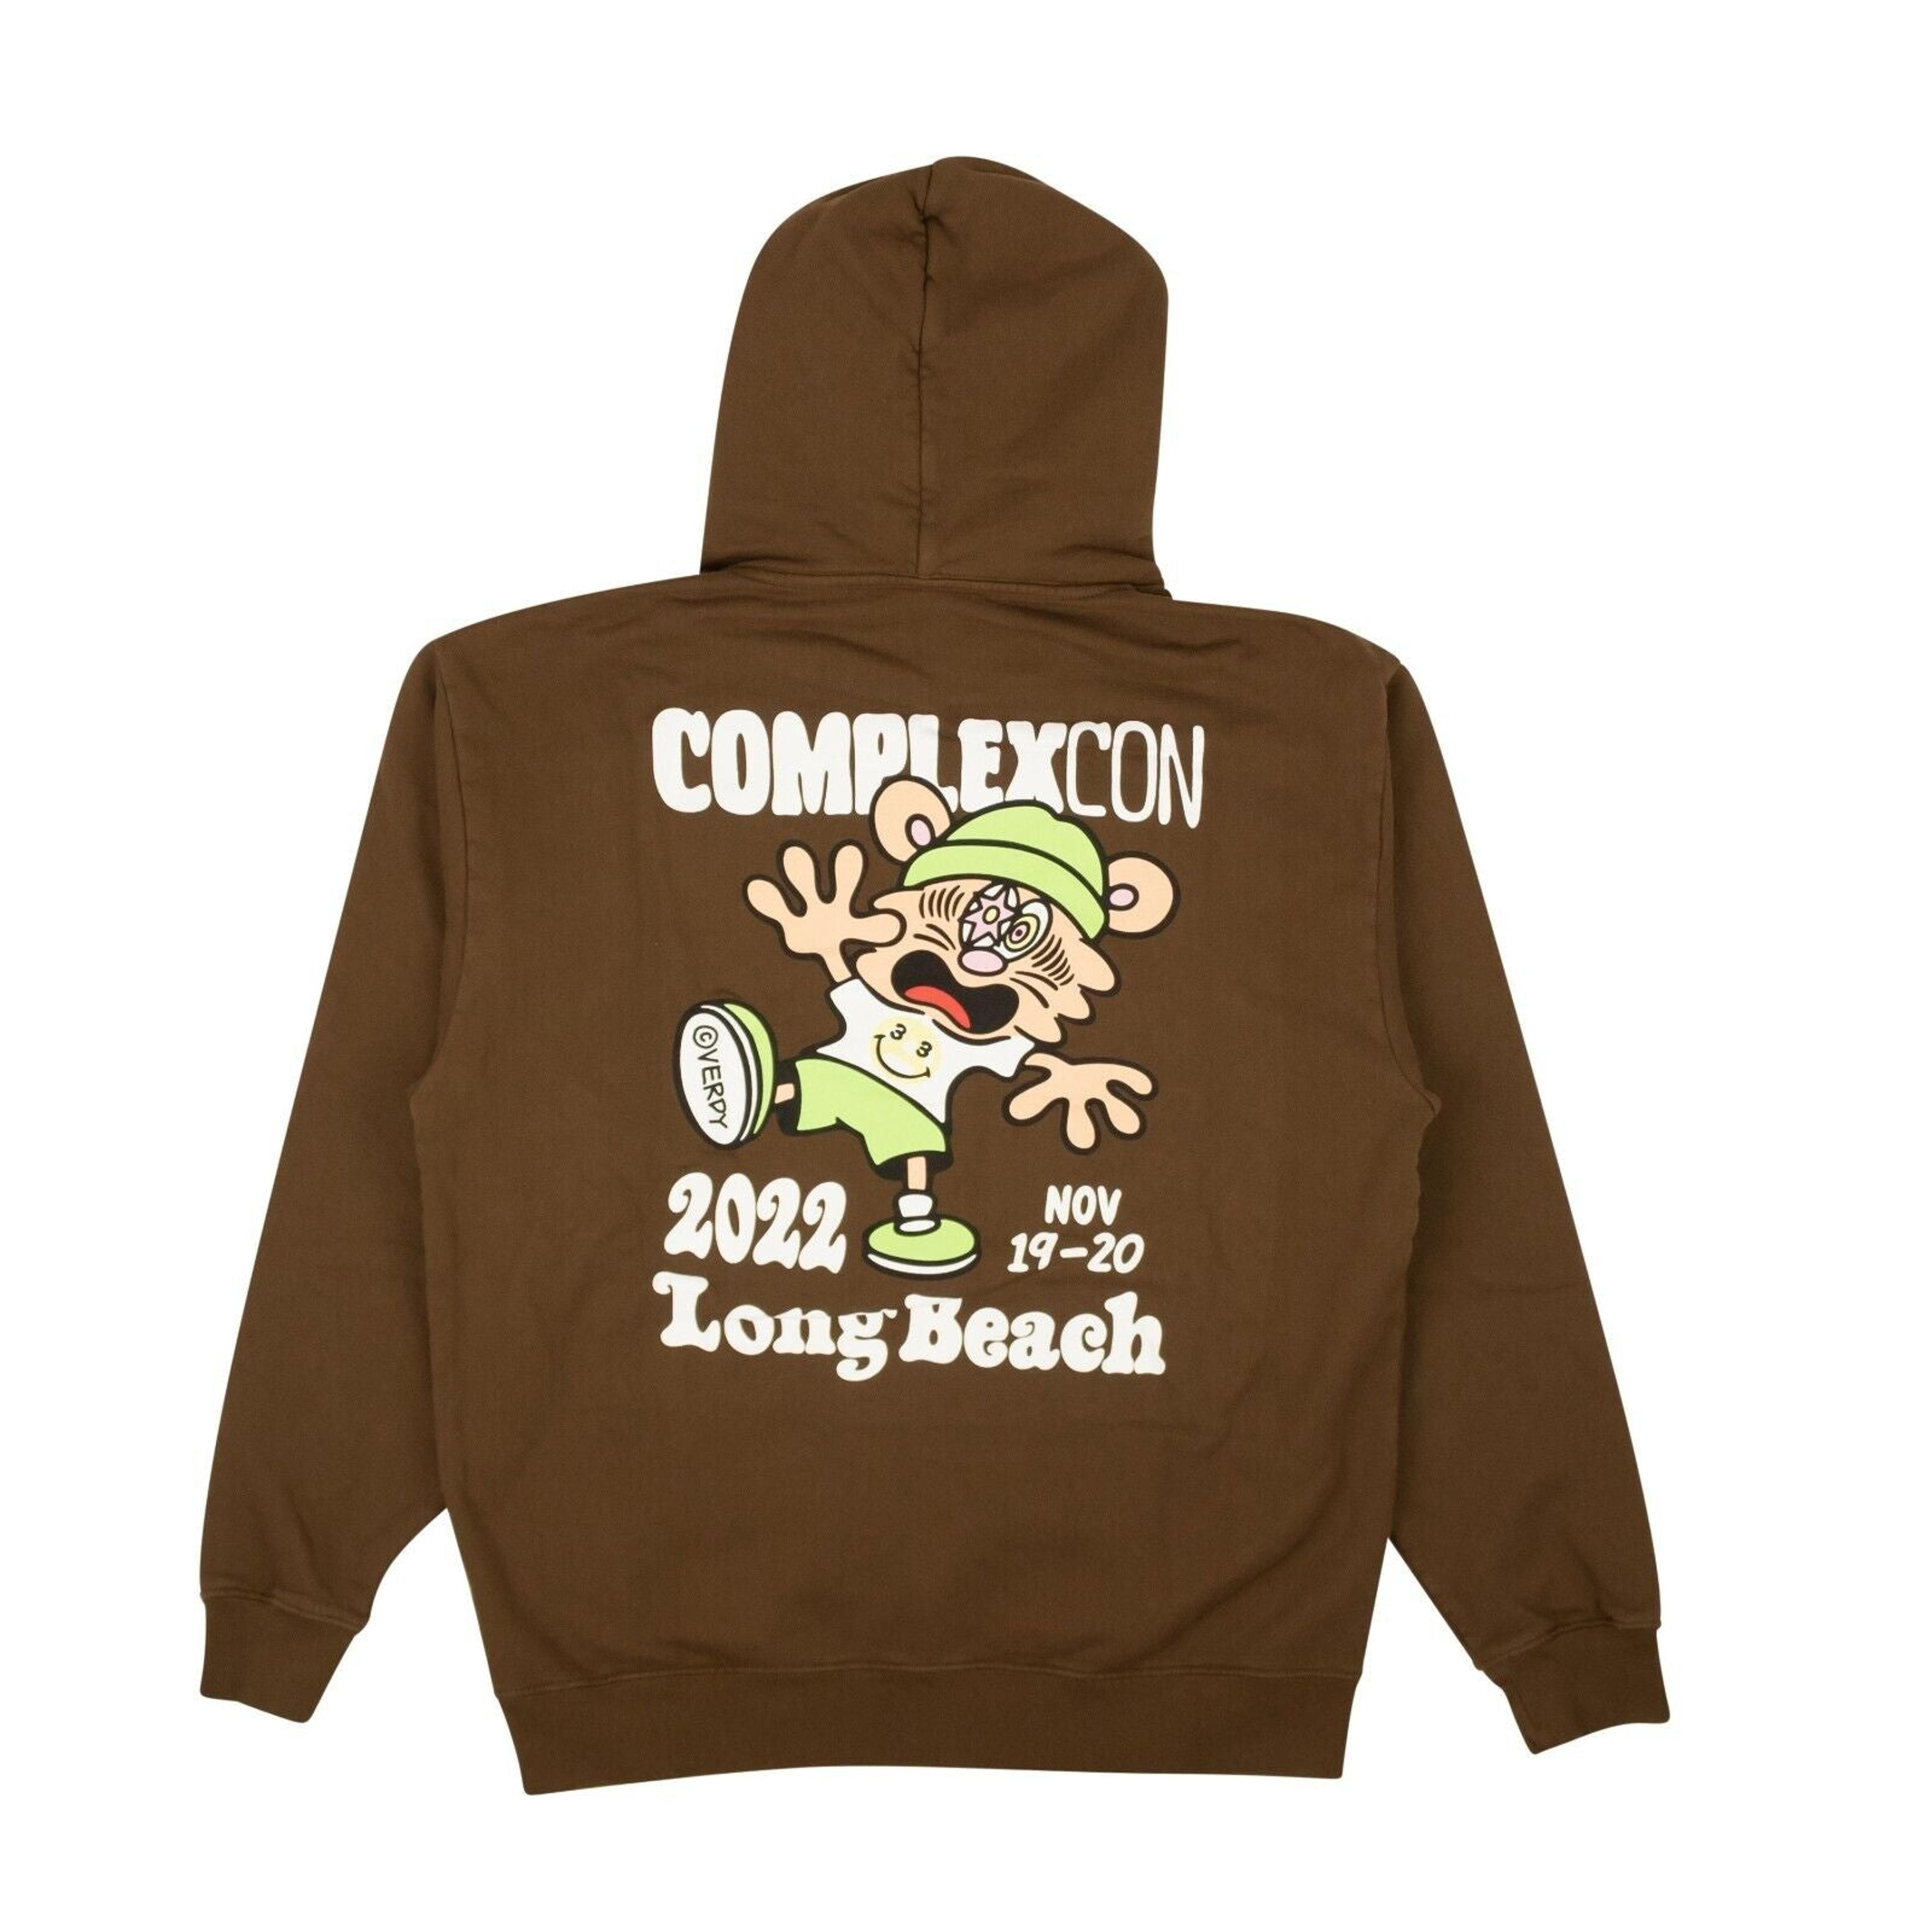 Alternate View 2 of Complexcon X Verdy Hoodie - Brown